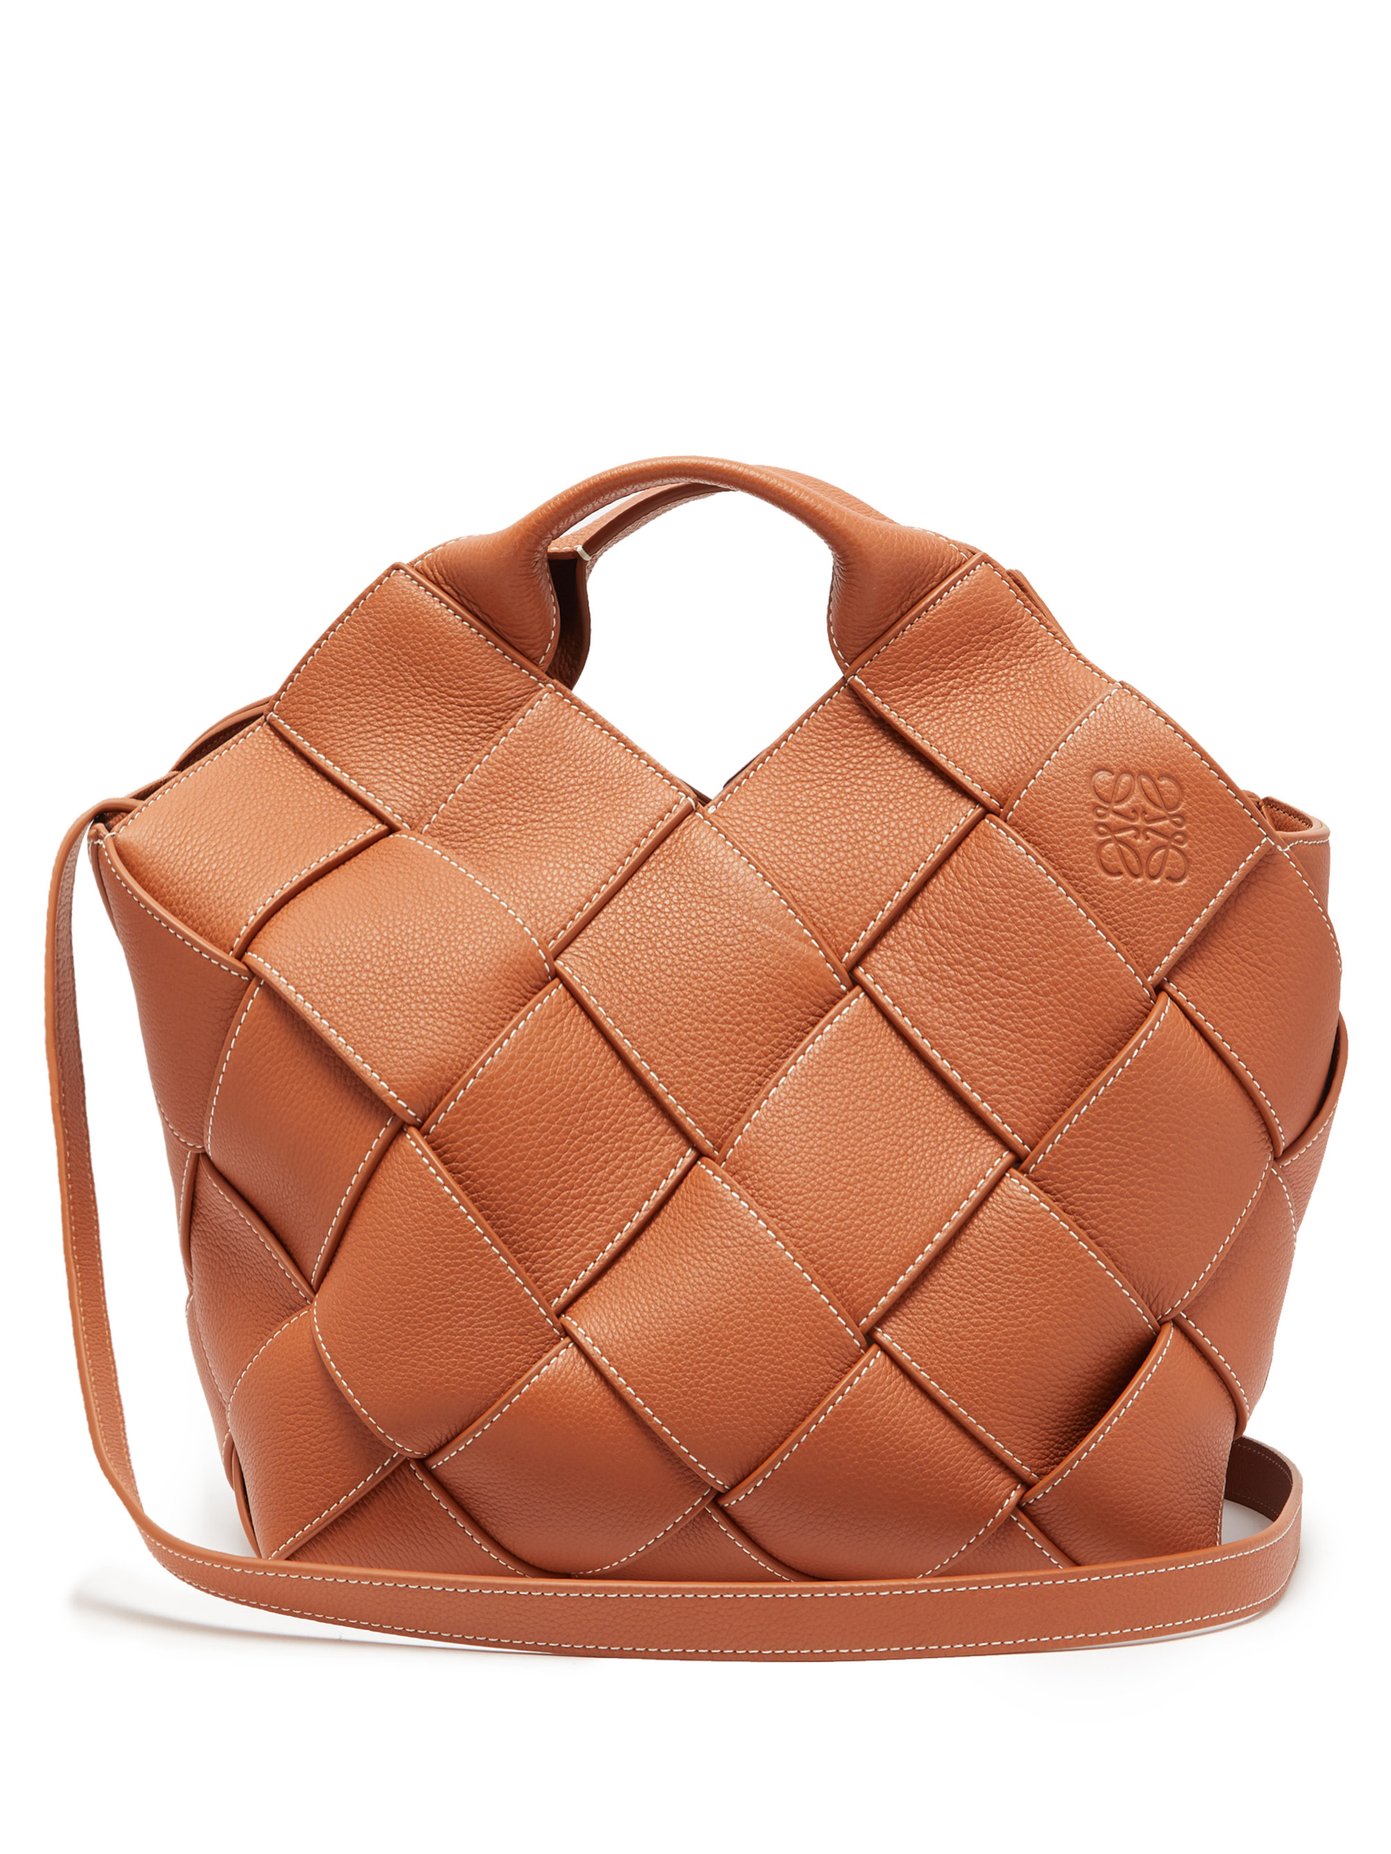 Anagram small woven-leather tote bag 